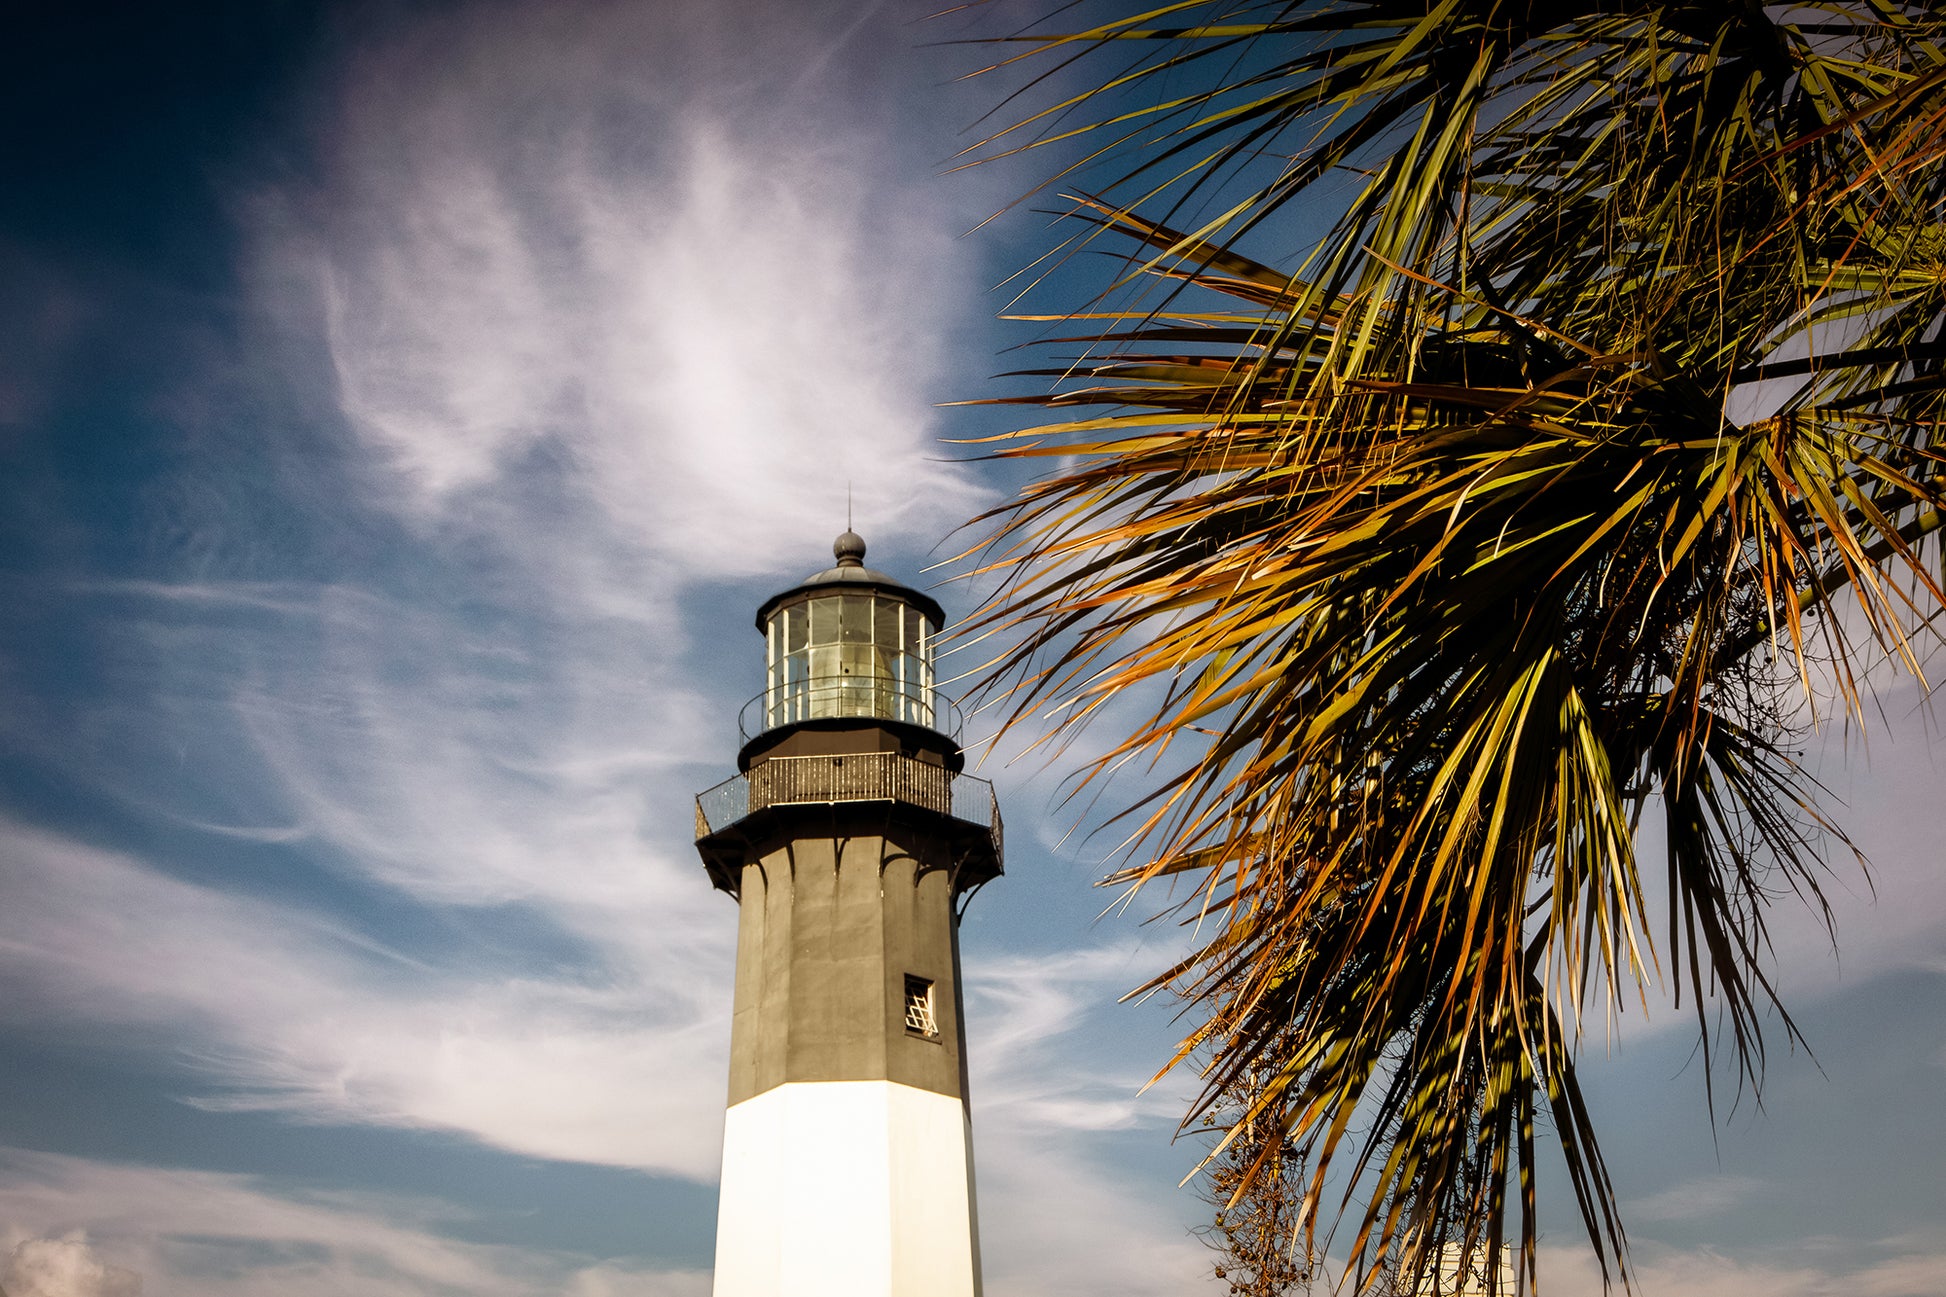 Architectural / Industrial / Maritime / Nautical / Decor Tybee Island Lighthouse 2 Loose Wall Art Print 